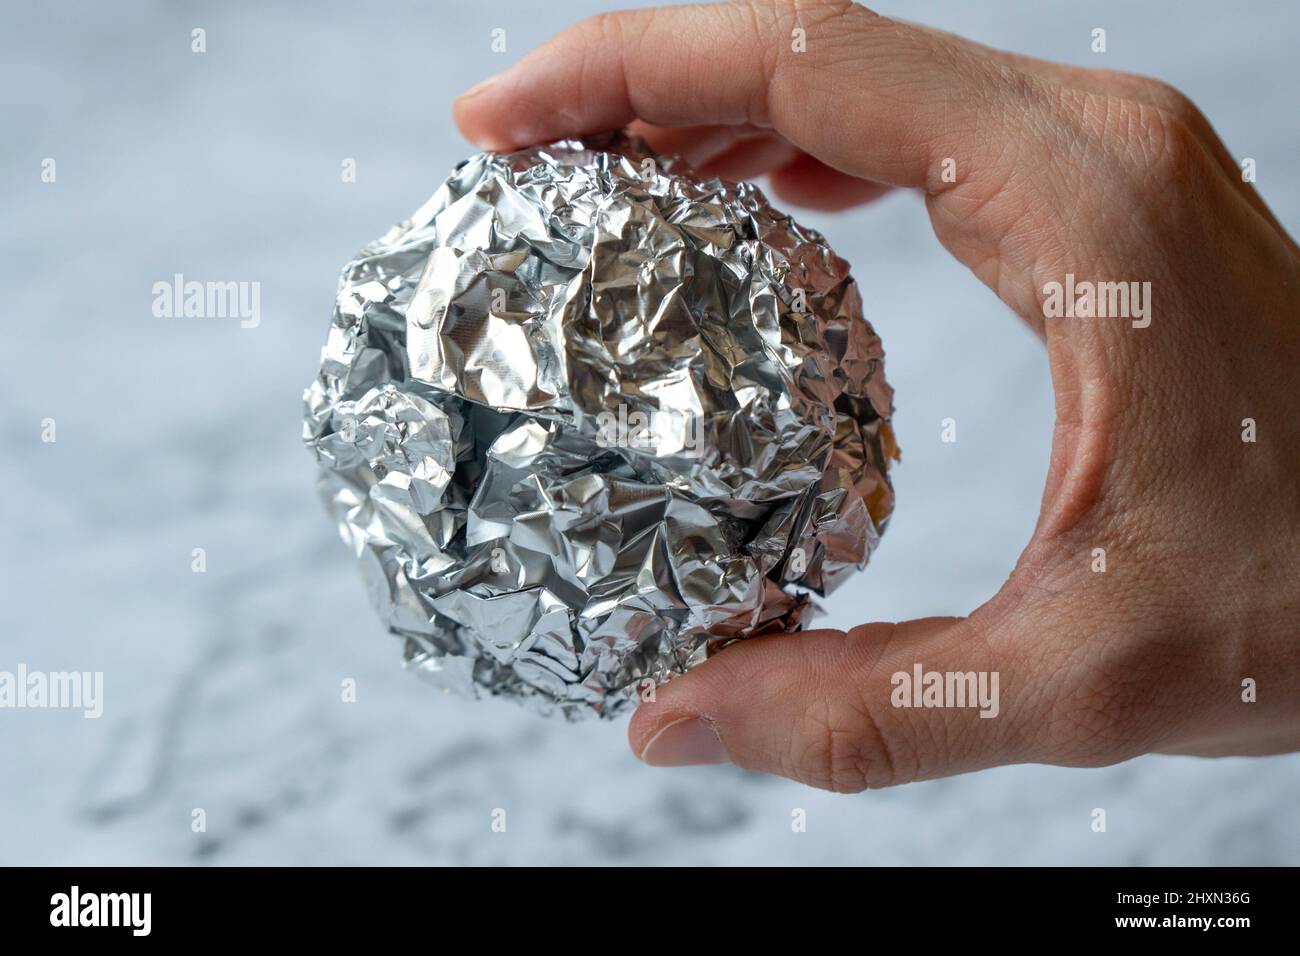 Wrinkled ball of aluminium foil, a material often used in the kitchen. Stock Photo